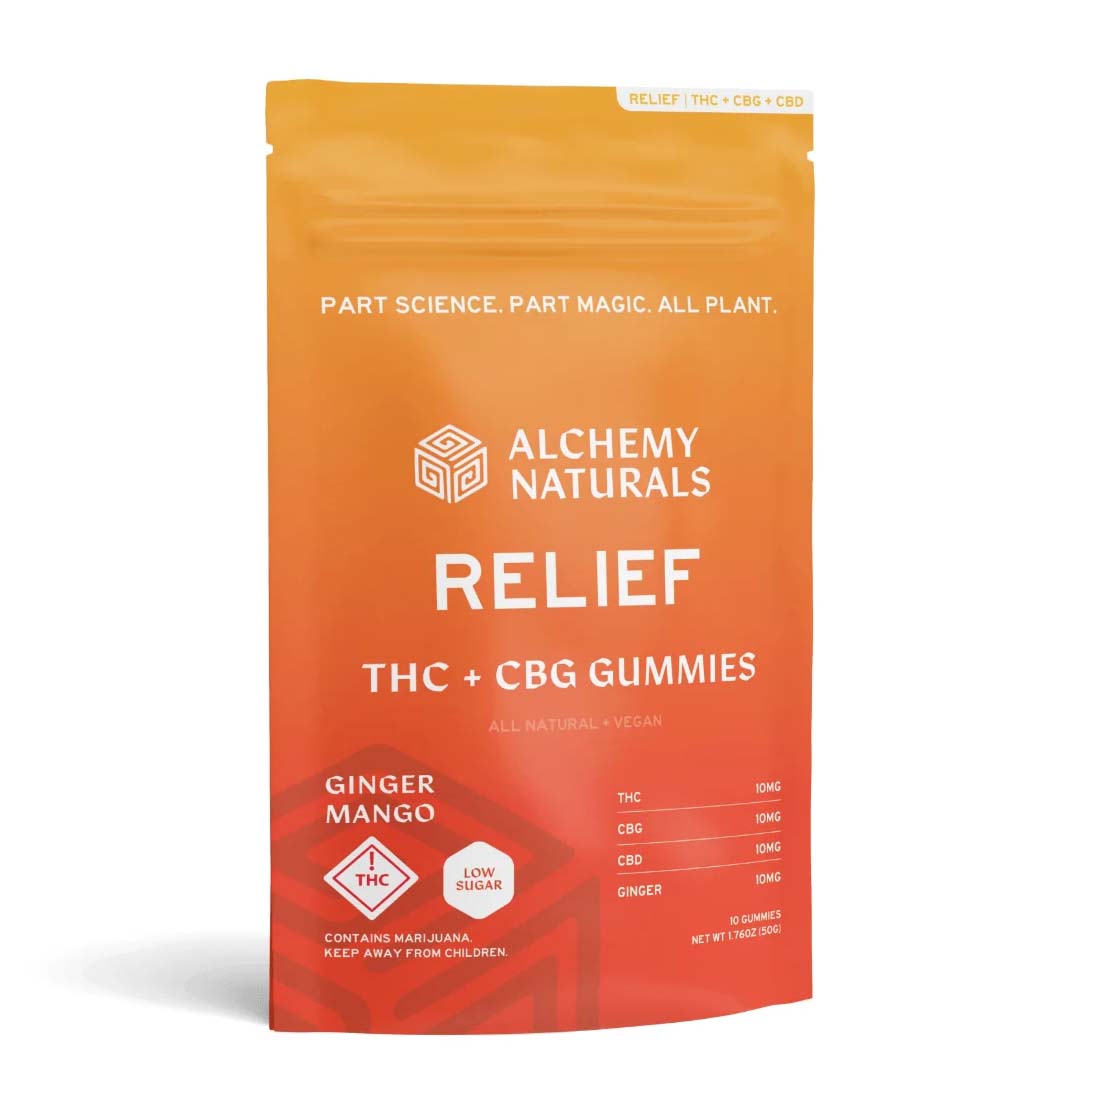 A package of Aclhemy Naturals Pain Relief THC gummies.